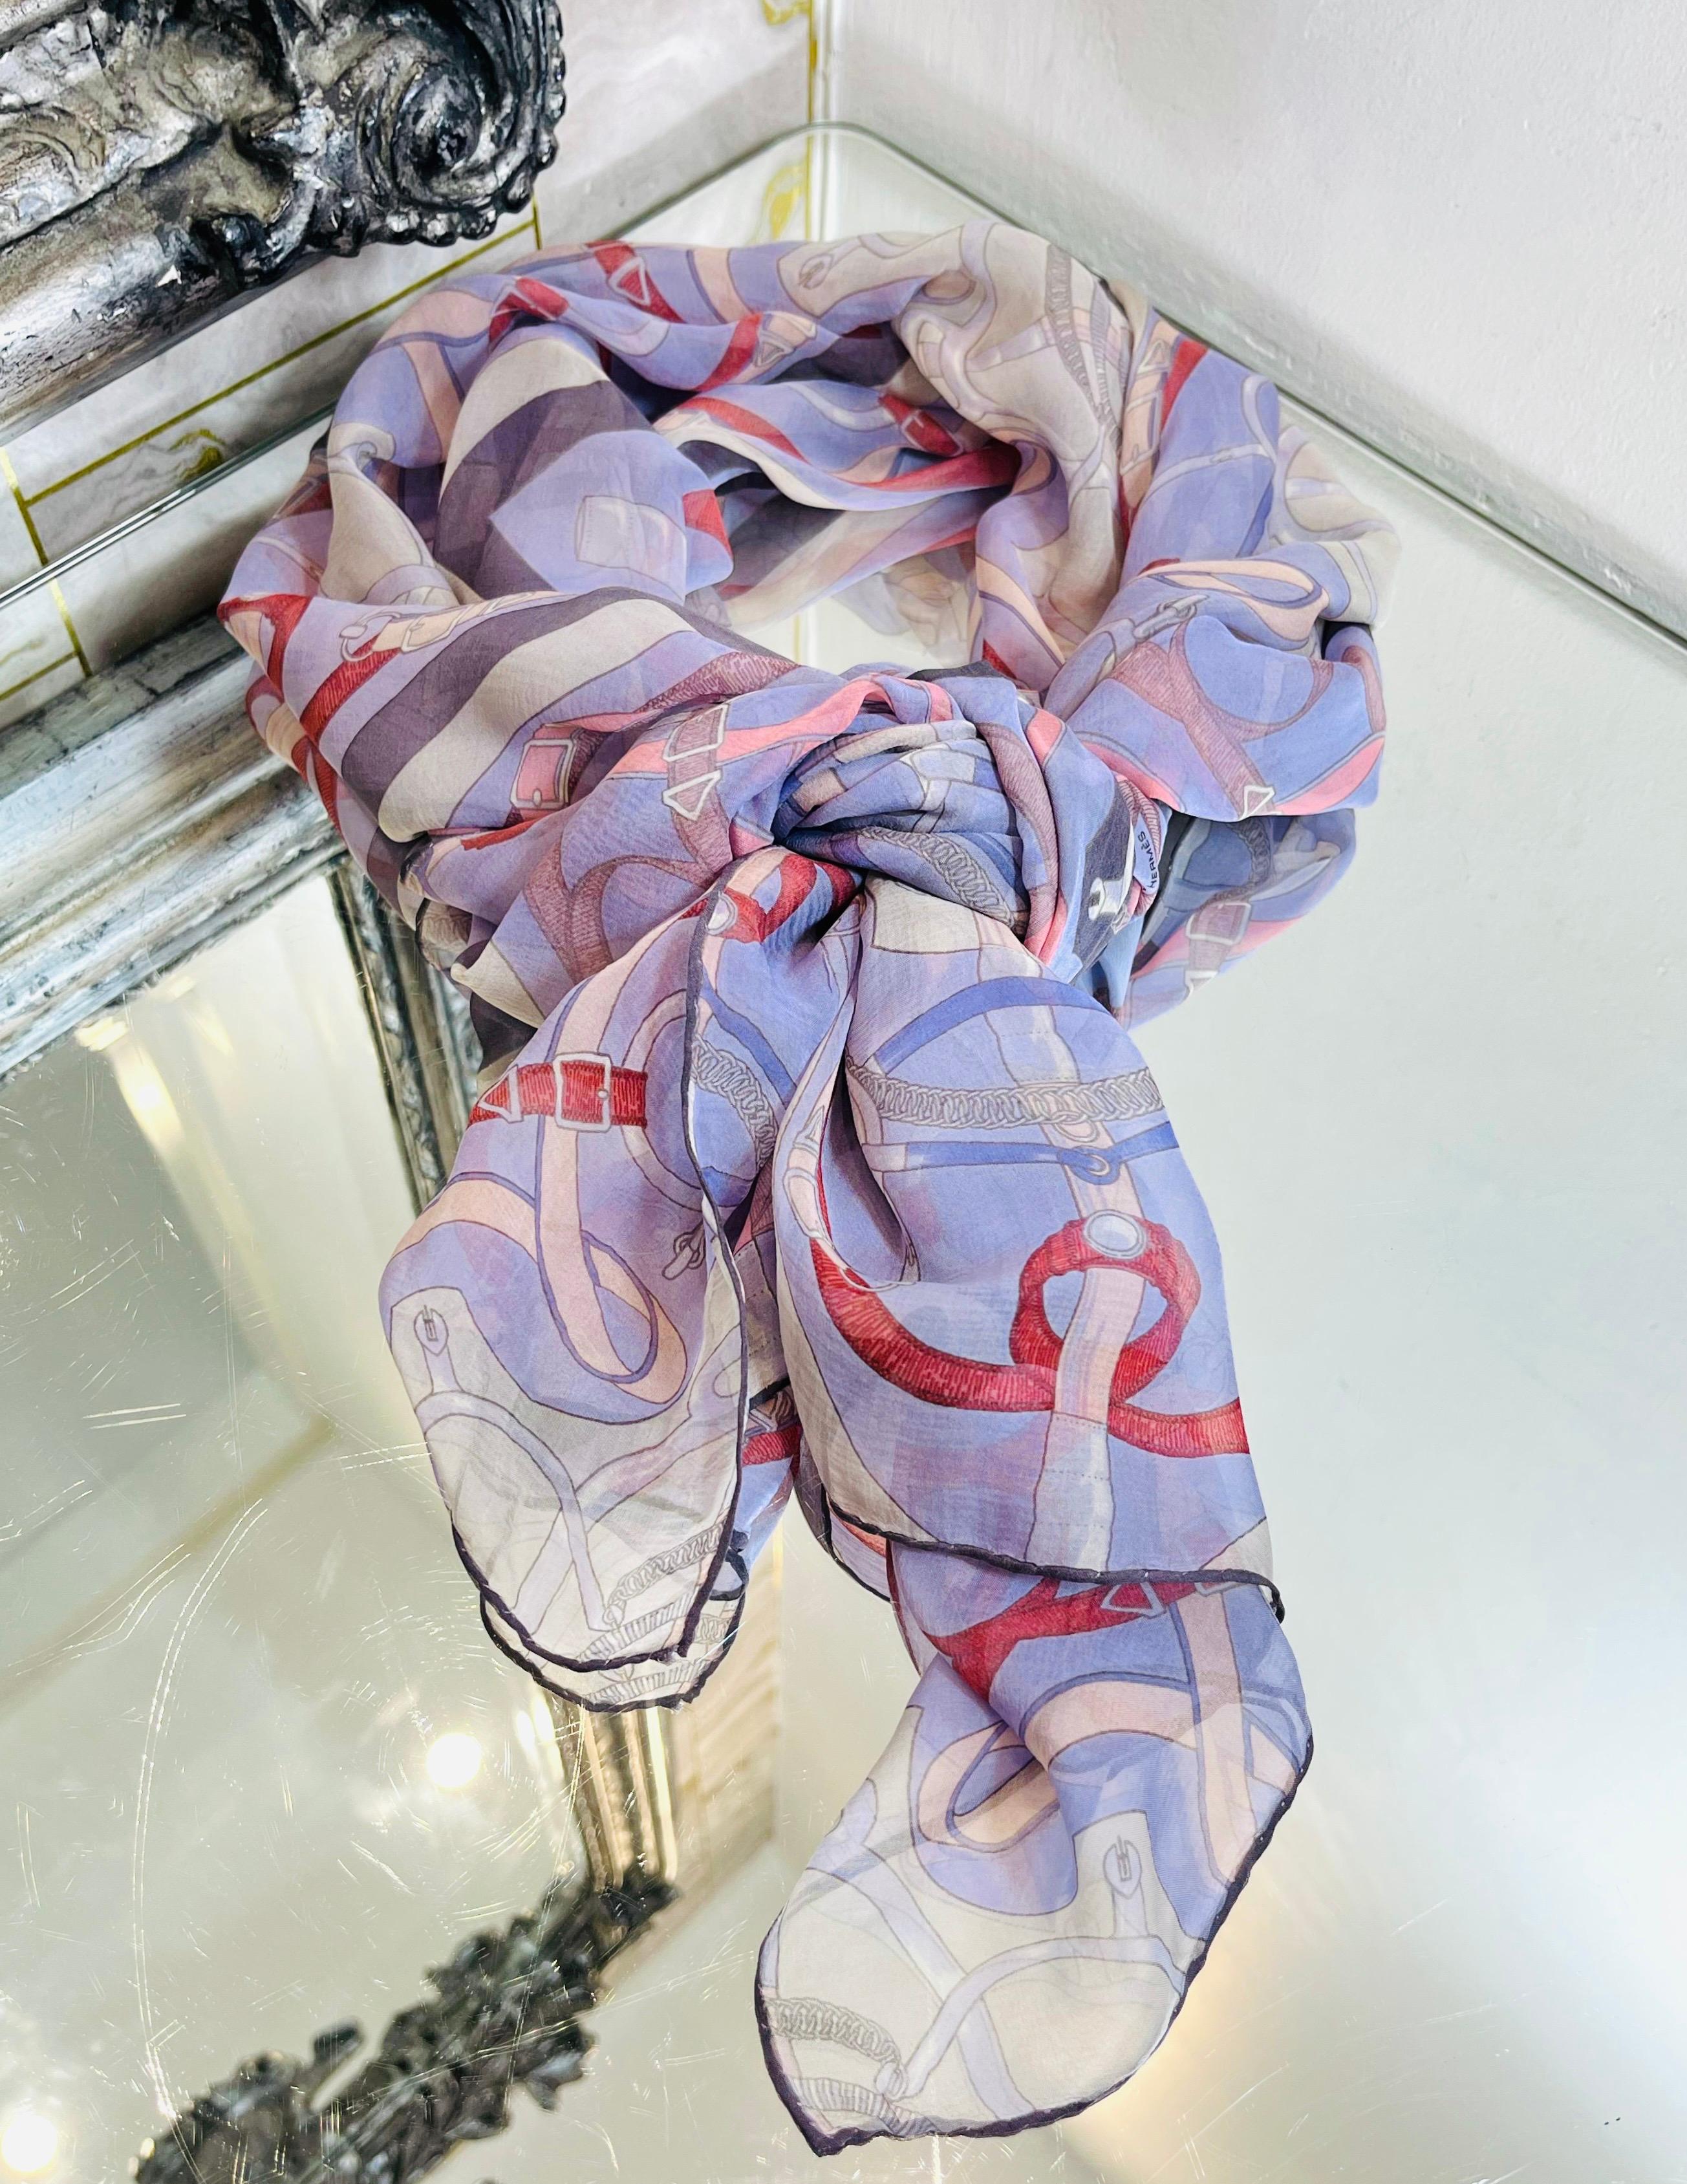 Hermes Sellier Printed Silk Scarf

Light purple scarf designed with buckle and chain prints in light pink and red.

Detailed with 'Hermes Tallier Paris' inscription and black finished edges.

Size – 173/63cm

Condition – Very Good

Composition –